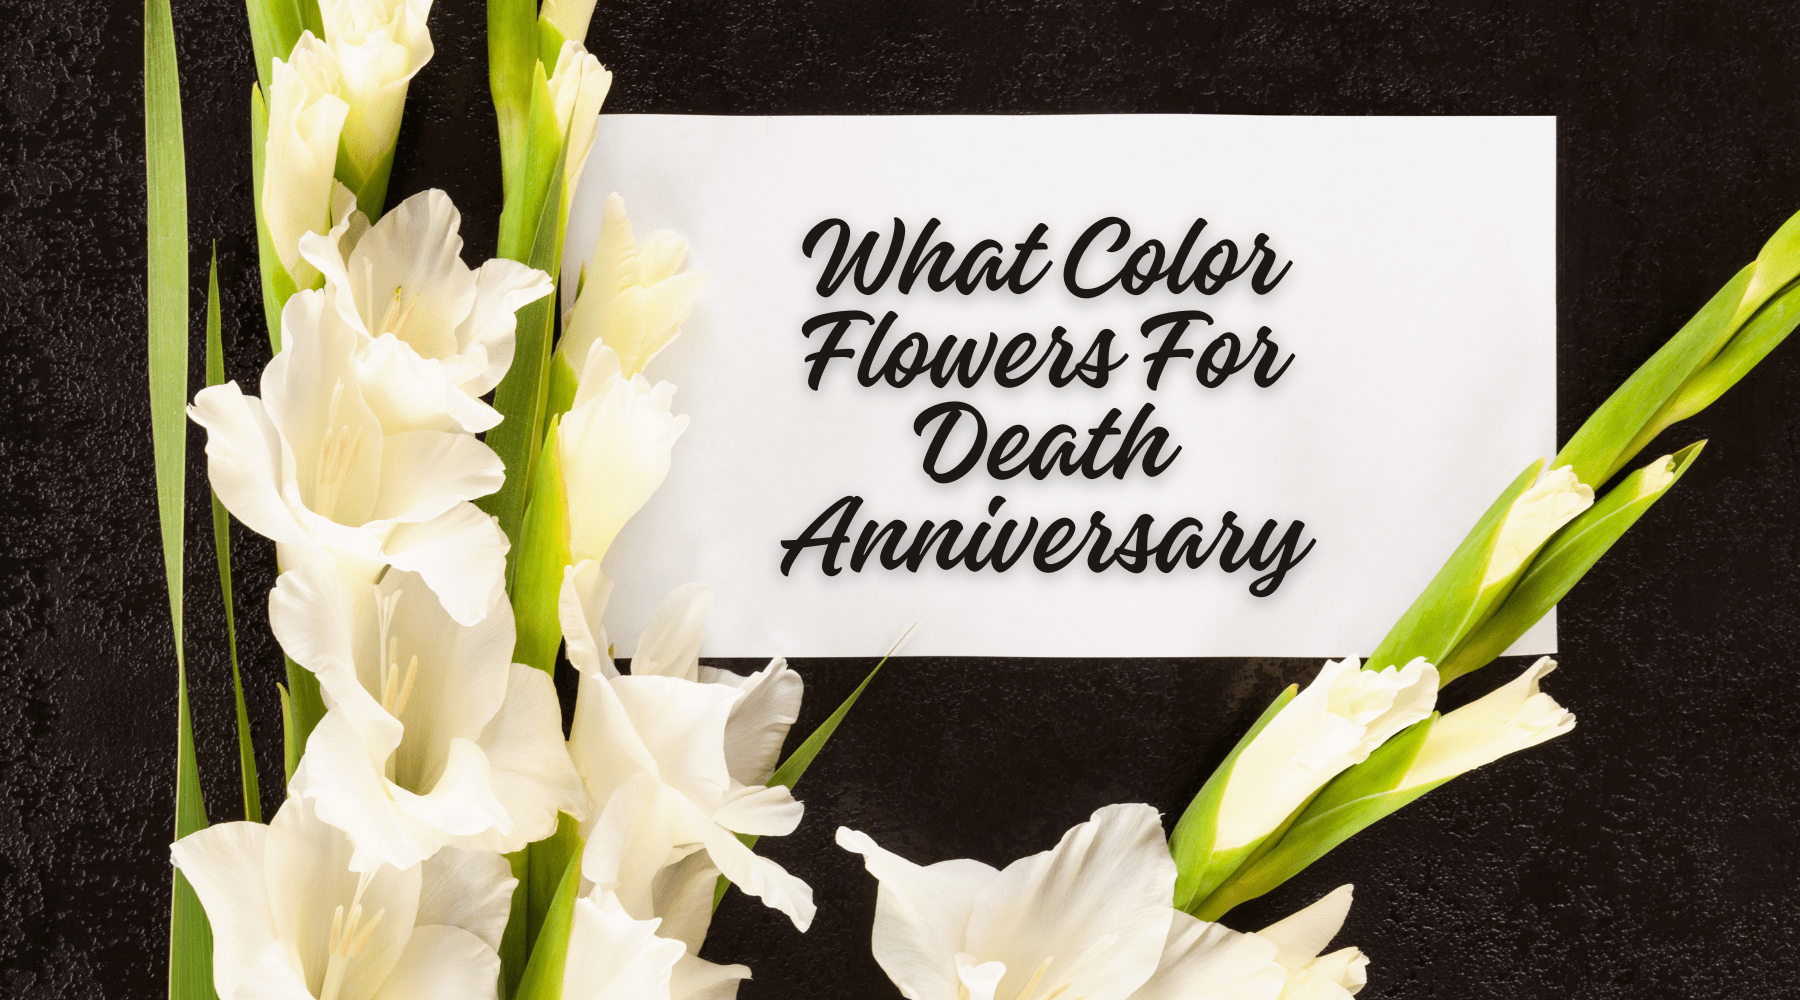 What Color Flowers For Death Anniversary